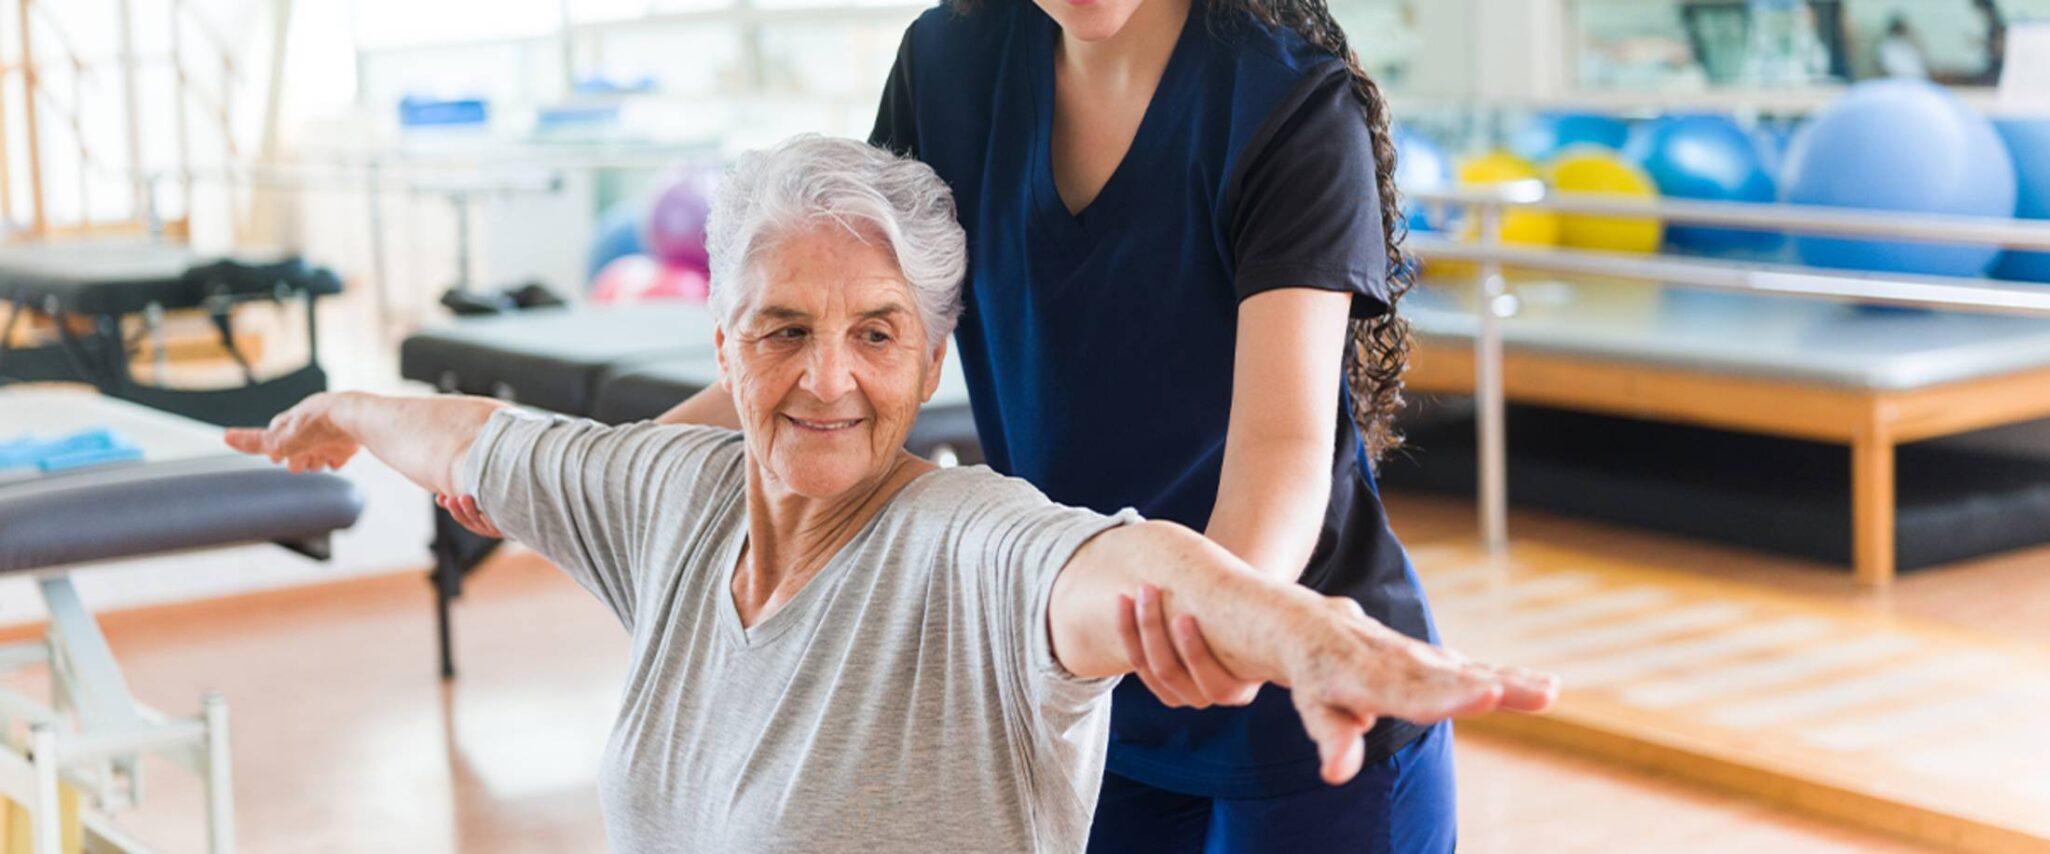 elderly woman doing exercises with the help of a physical therapist